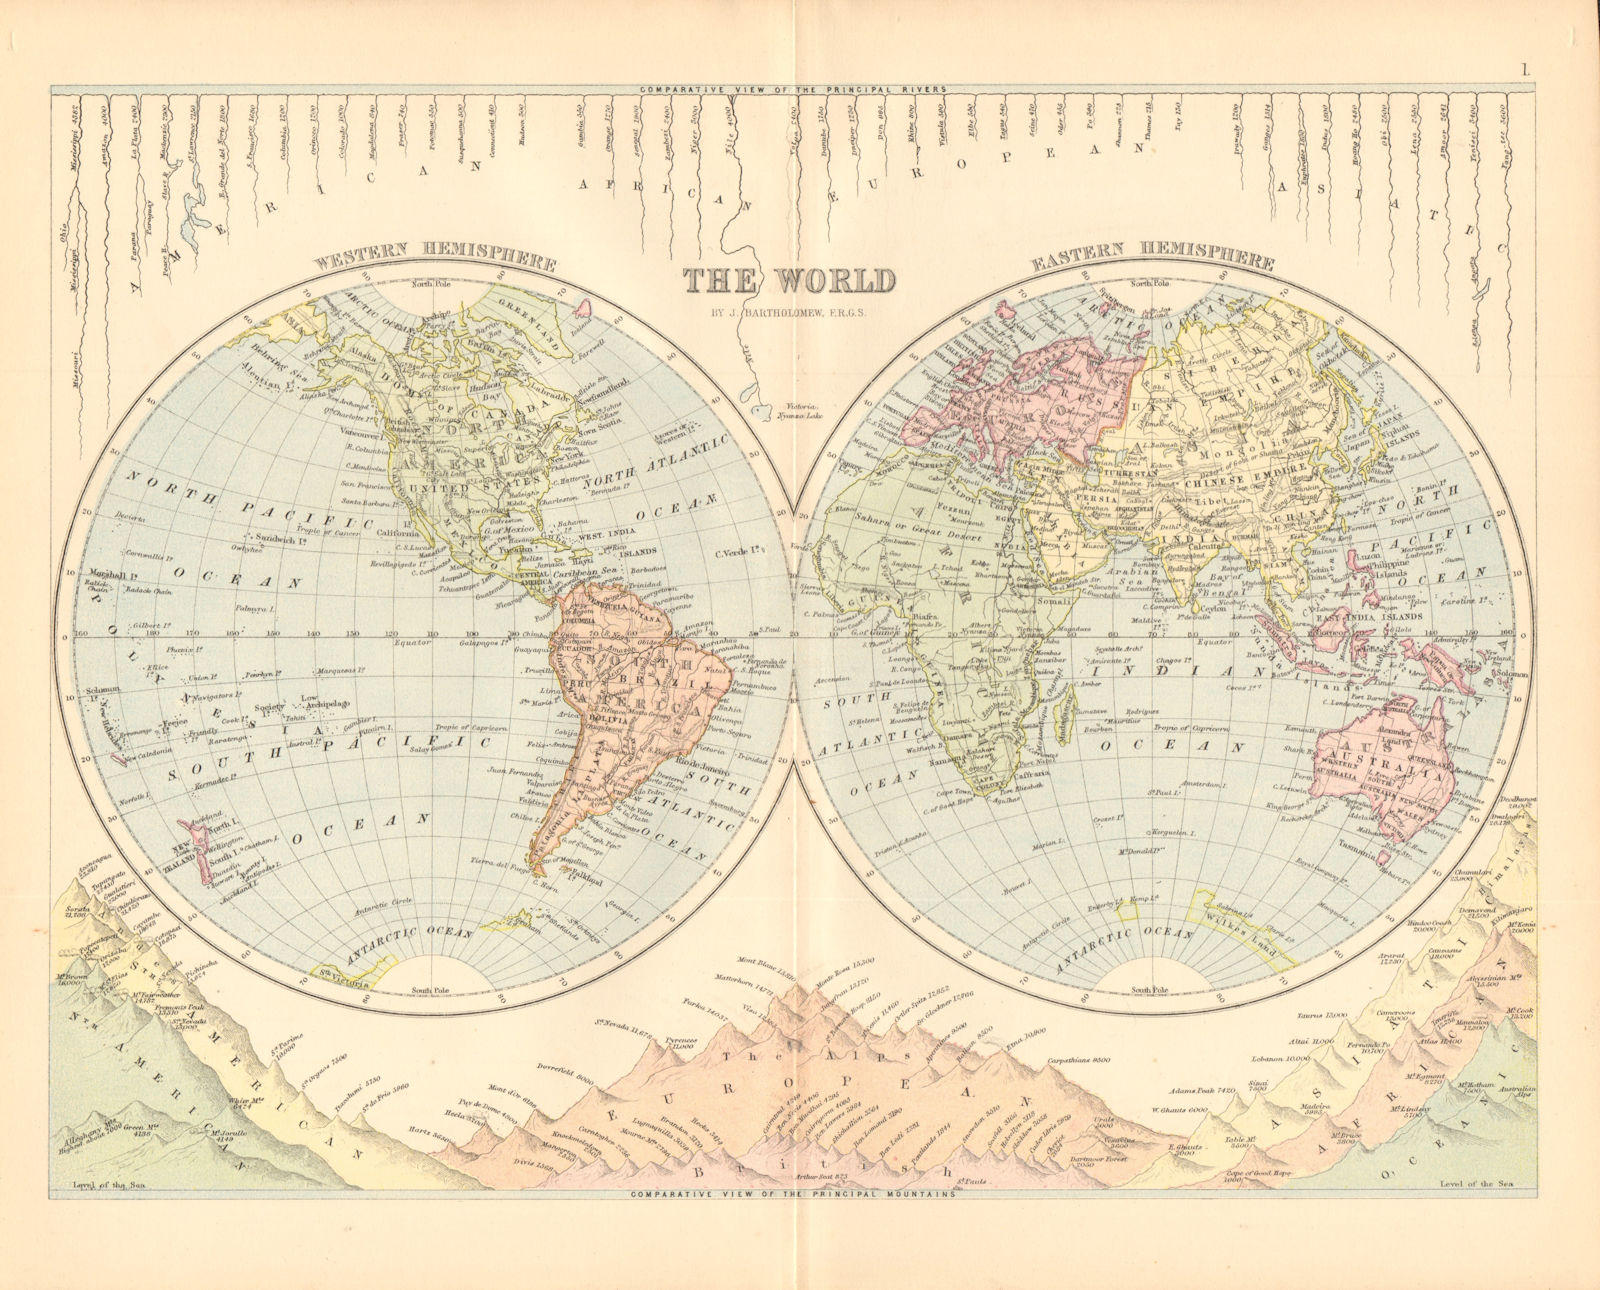 Associate Product THE WORLD IN HEMISPHERES. River lengths Mountain heights. BARTHOLOMEW 1876 map